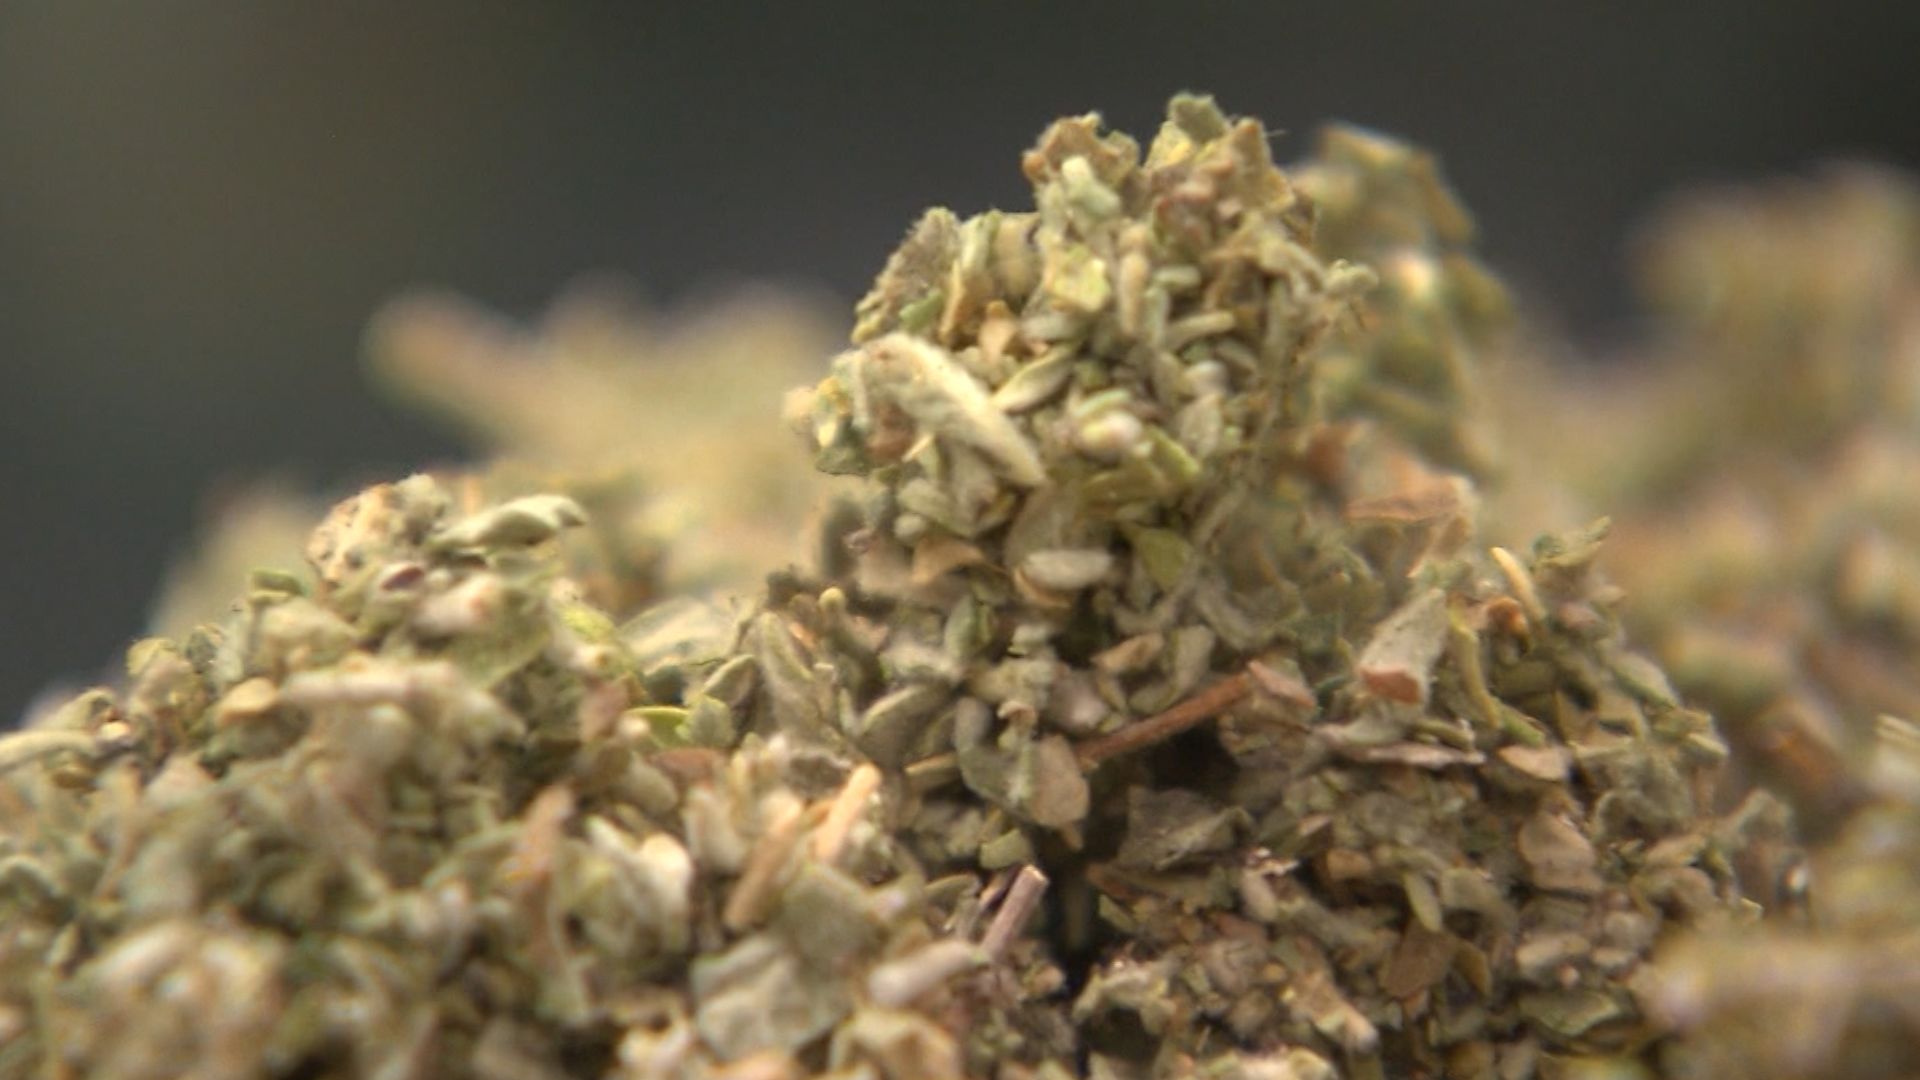 Mass intoxication in New York City was caused by powerful synthetic weed, Science